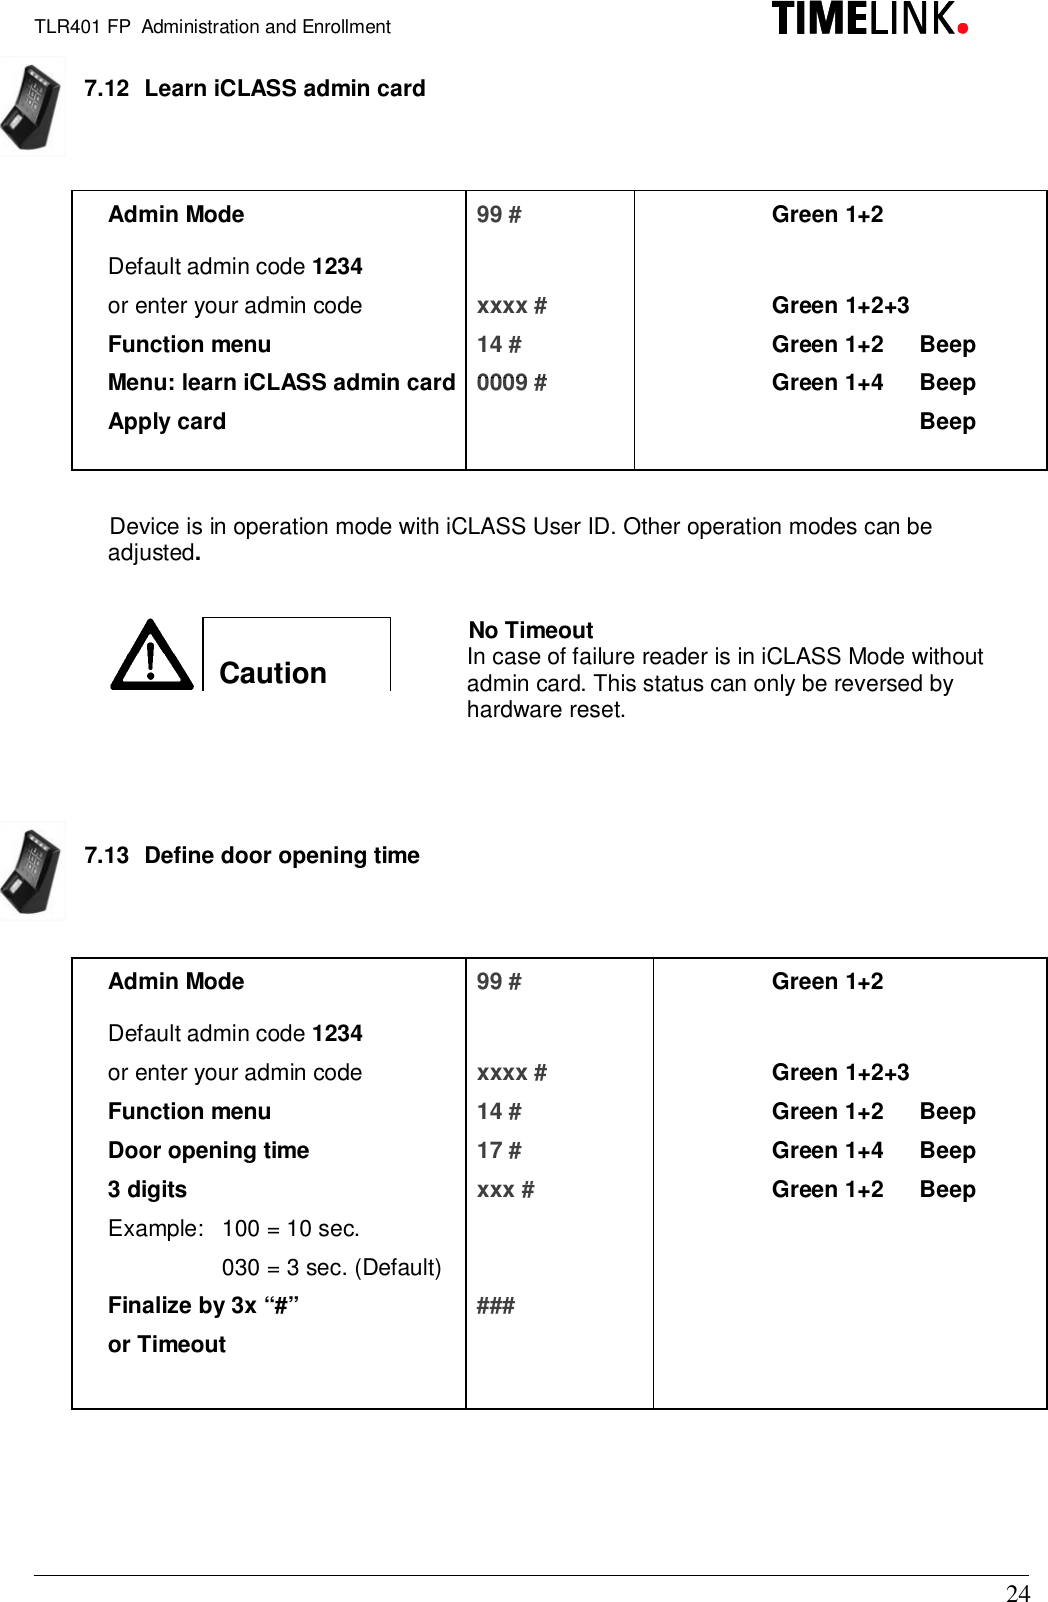 TLR401 FP  Administration and Enrollment247.12  Learn iCLASS admin cardAdmin Mode 99 # Green 1+2Default admin code 1234or enter your admin code xxxx # Green 1+2+3Function menu 14 # Green 1+2  BeepMenu: learn iCLASS admin card  0009 # Green 1+4  BeepApply card BeepDevice is in operation mode with iCLASS User ID. Other operation modes can beadjusted.Caution7.13  Define door opening timeAdmin Mode 99 # Green 1+2Default admin code 1234or enter your admin code xxxx # Green 1+2+3Function menu 14 # Green 1+2  BeepDoor opening time 17 # Green 1+4  Beep3 digits xxx # Green 1+2  BeepExample:  100 = 10 sec.030 = 3 sec. (Default)Finalize by 3x “#” ###or TimeoutNo TimeoutIn case of failure reader is in iCLASS Mode withoutadmin card. This status can only be reversed byhardware reset.